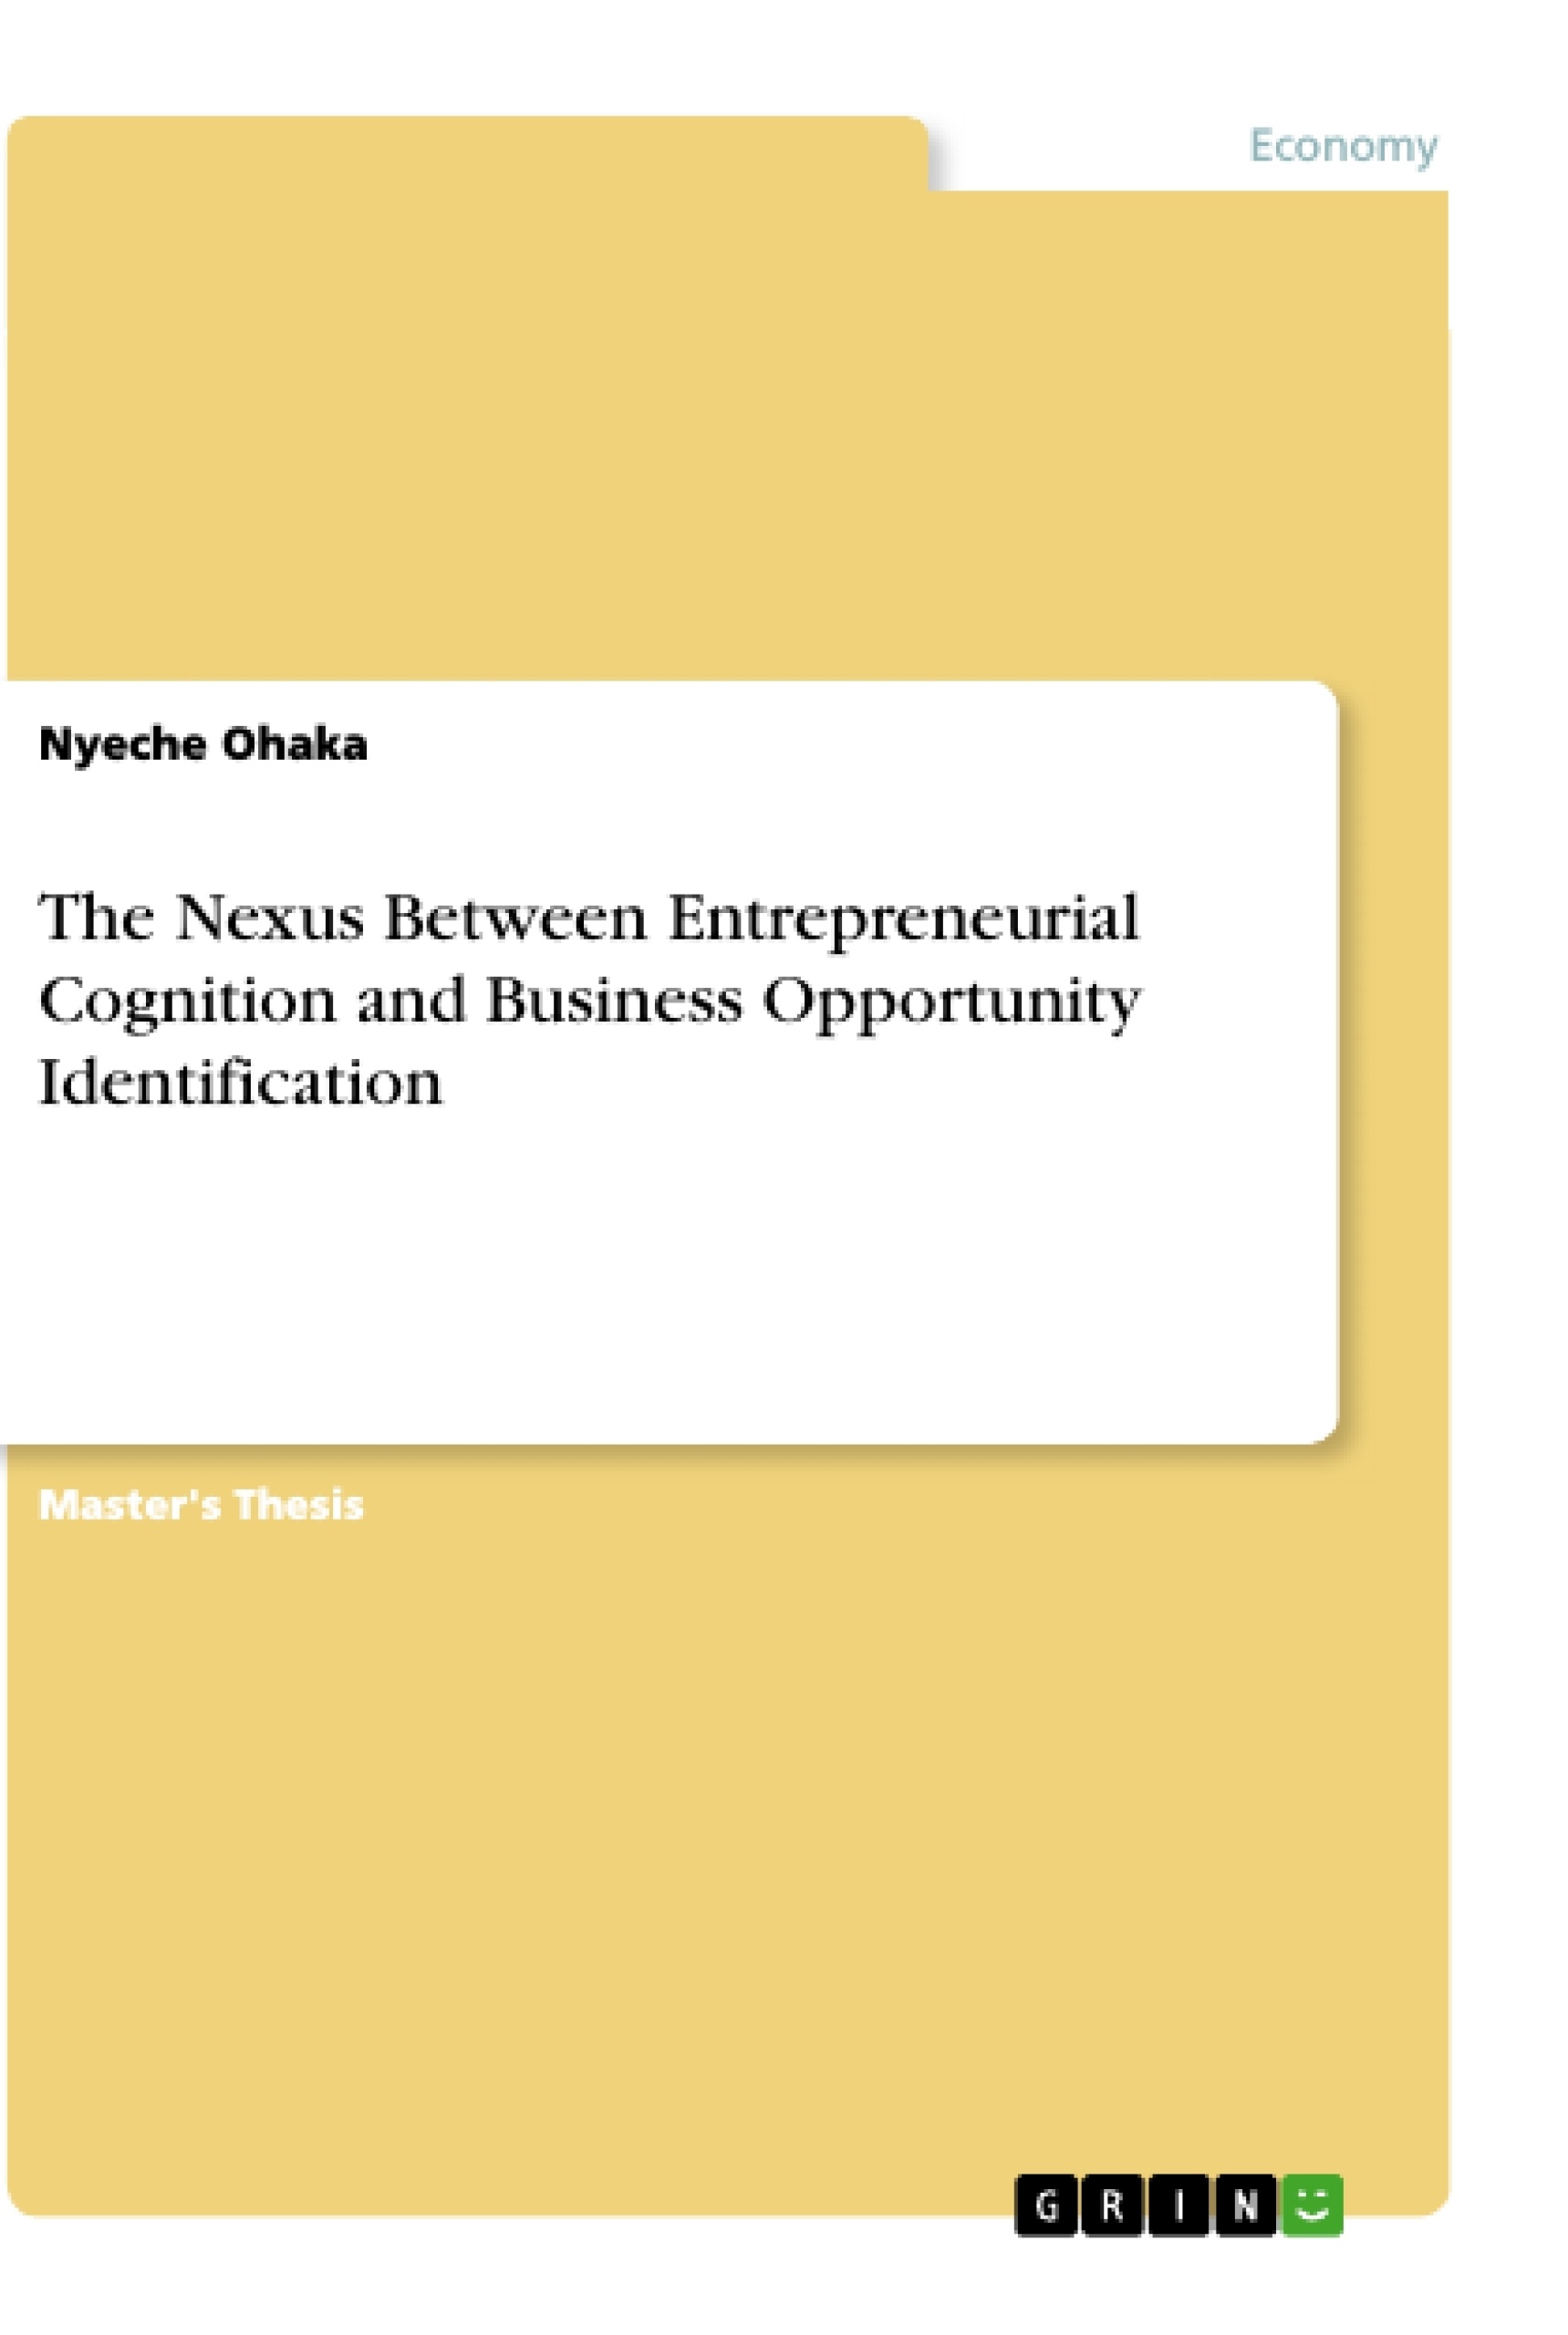 Title: The Nexus Between Entrepreneurial Cognition and Business Opportunity Identification